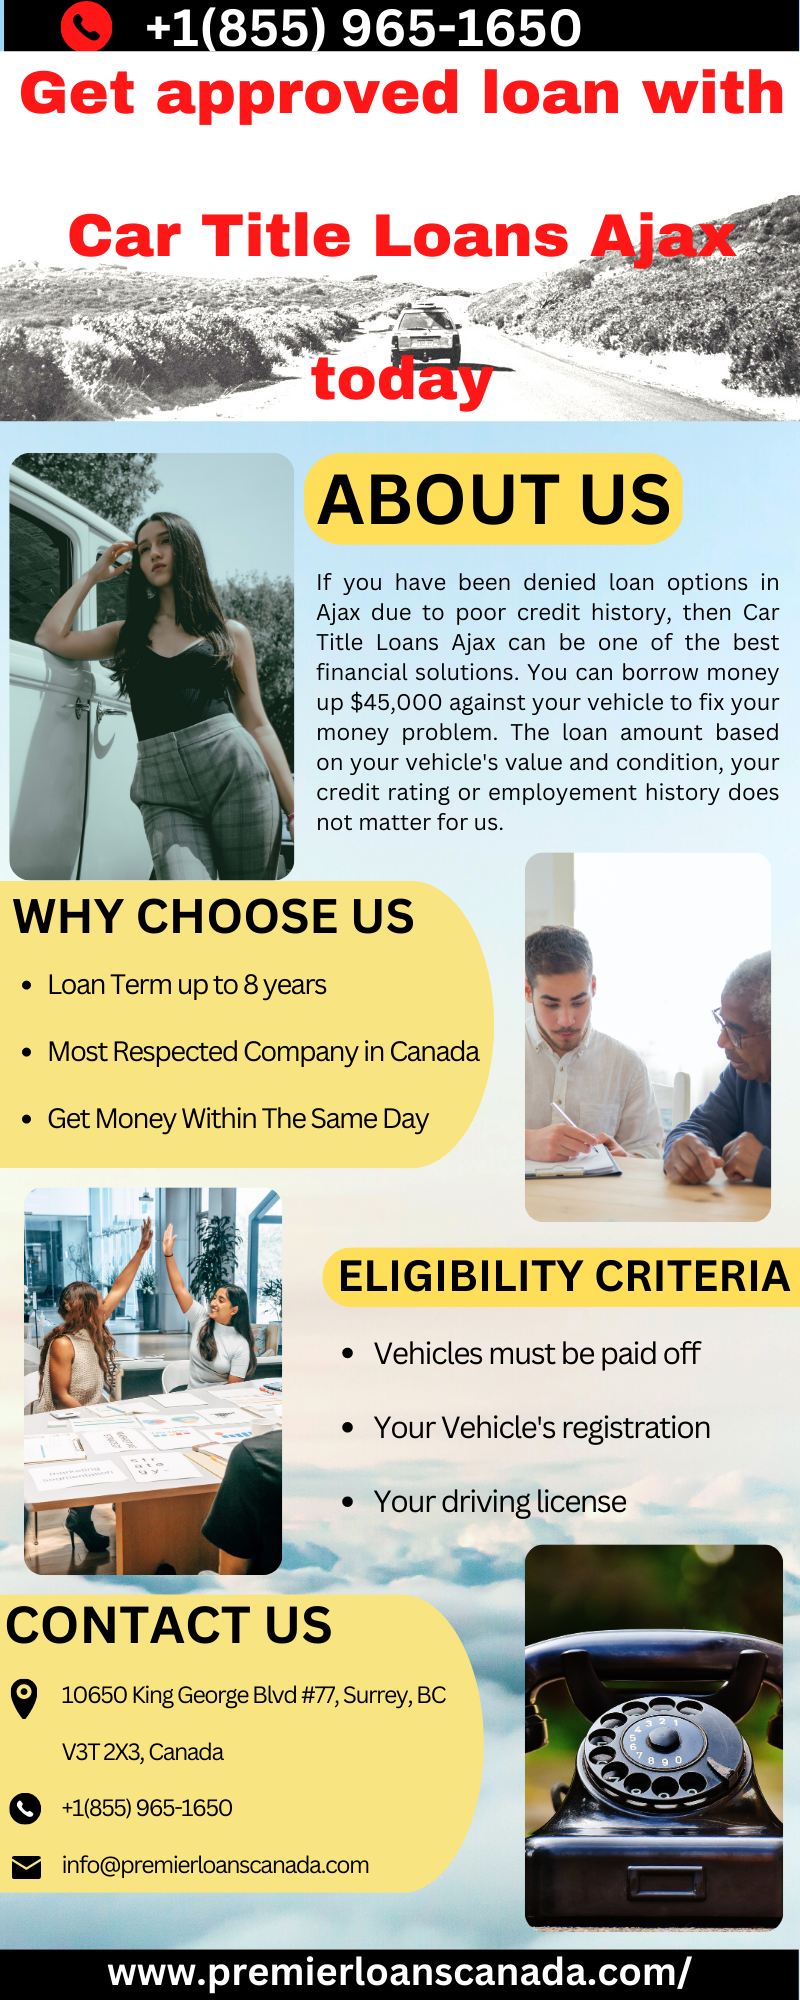 Get approved loan with Car Title Loans Ajax today